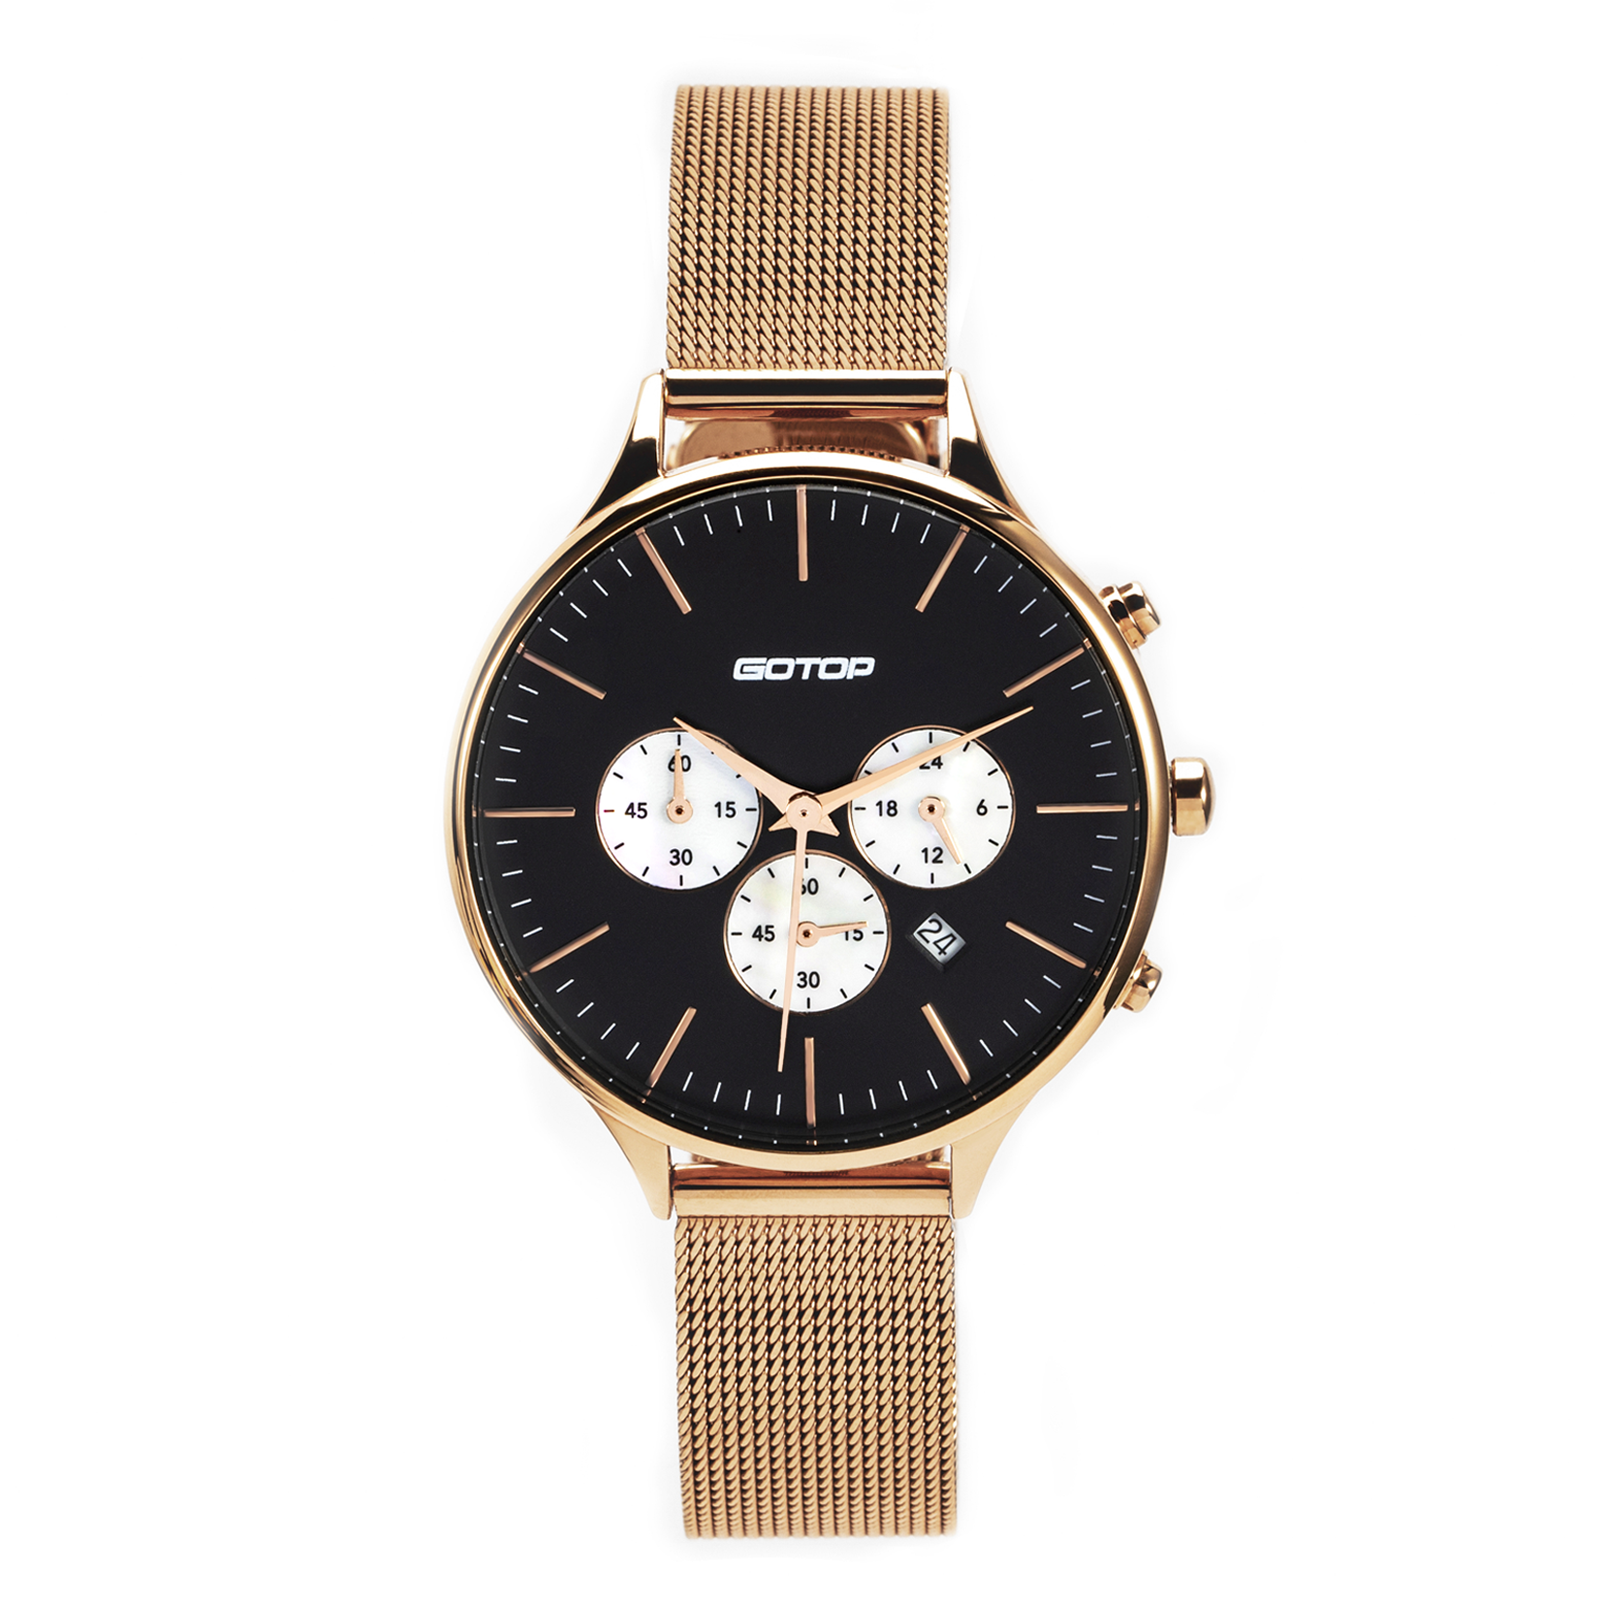 SS356-02 CHRONOGRAPH FUNCTION & CHARMING DESIGN LADIES WATCH